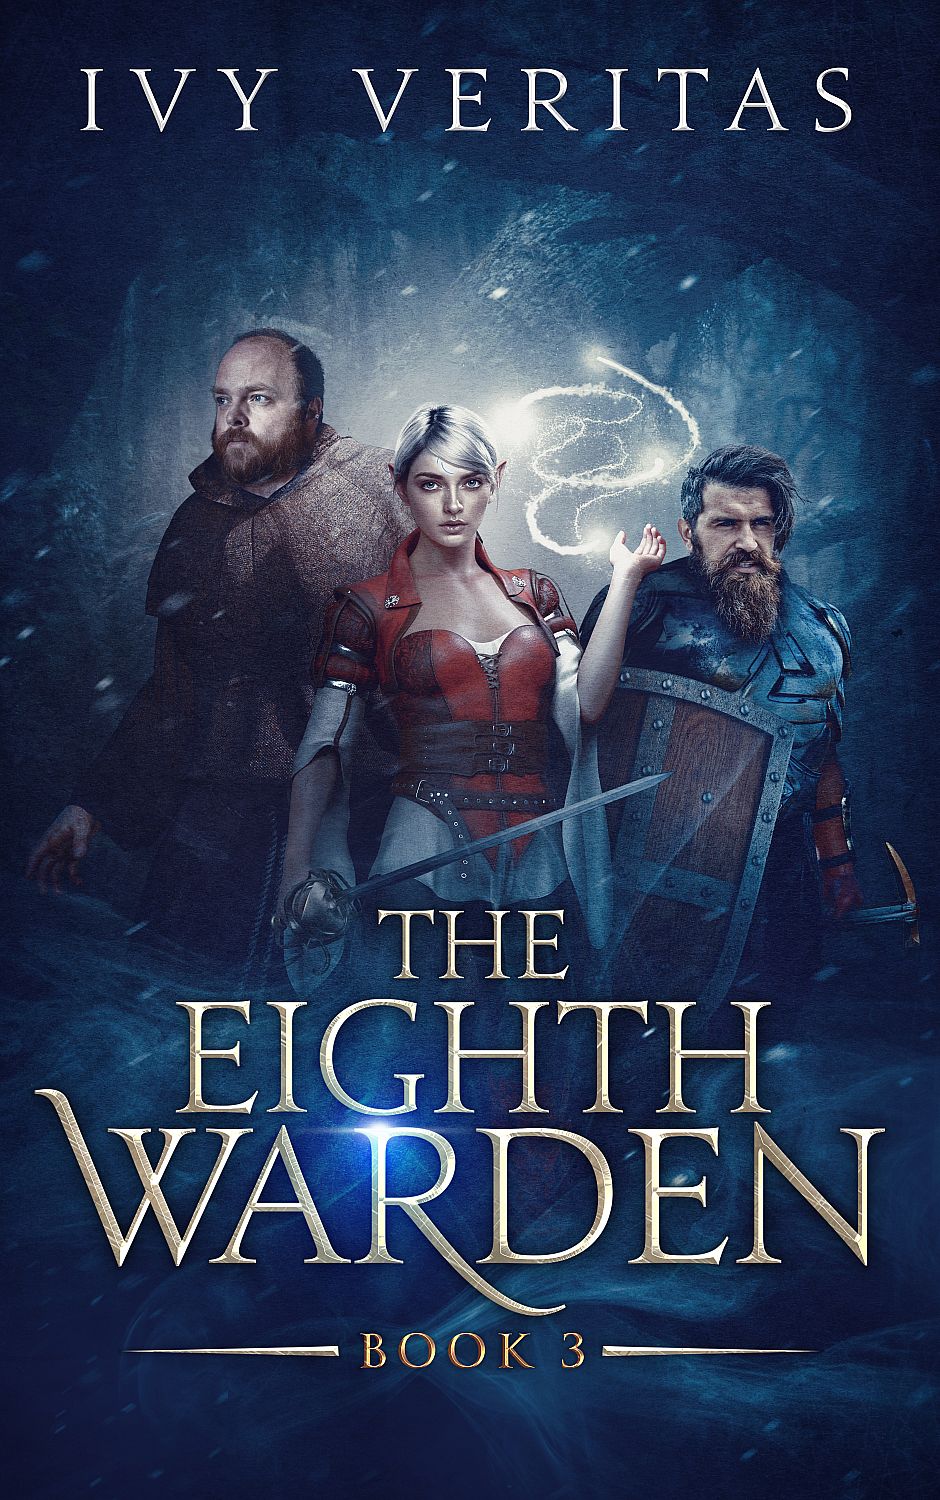 The Eighth Warden Book 3 - Cover